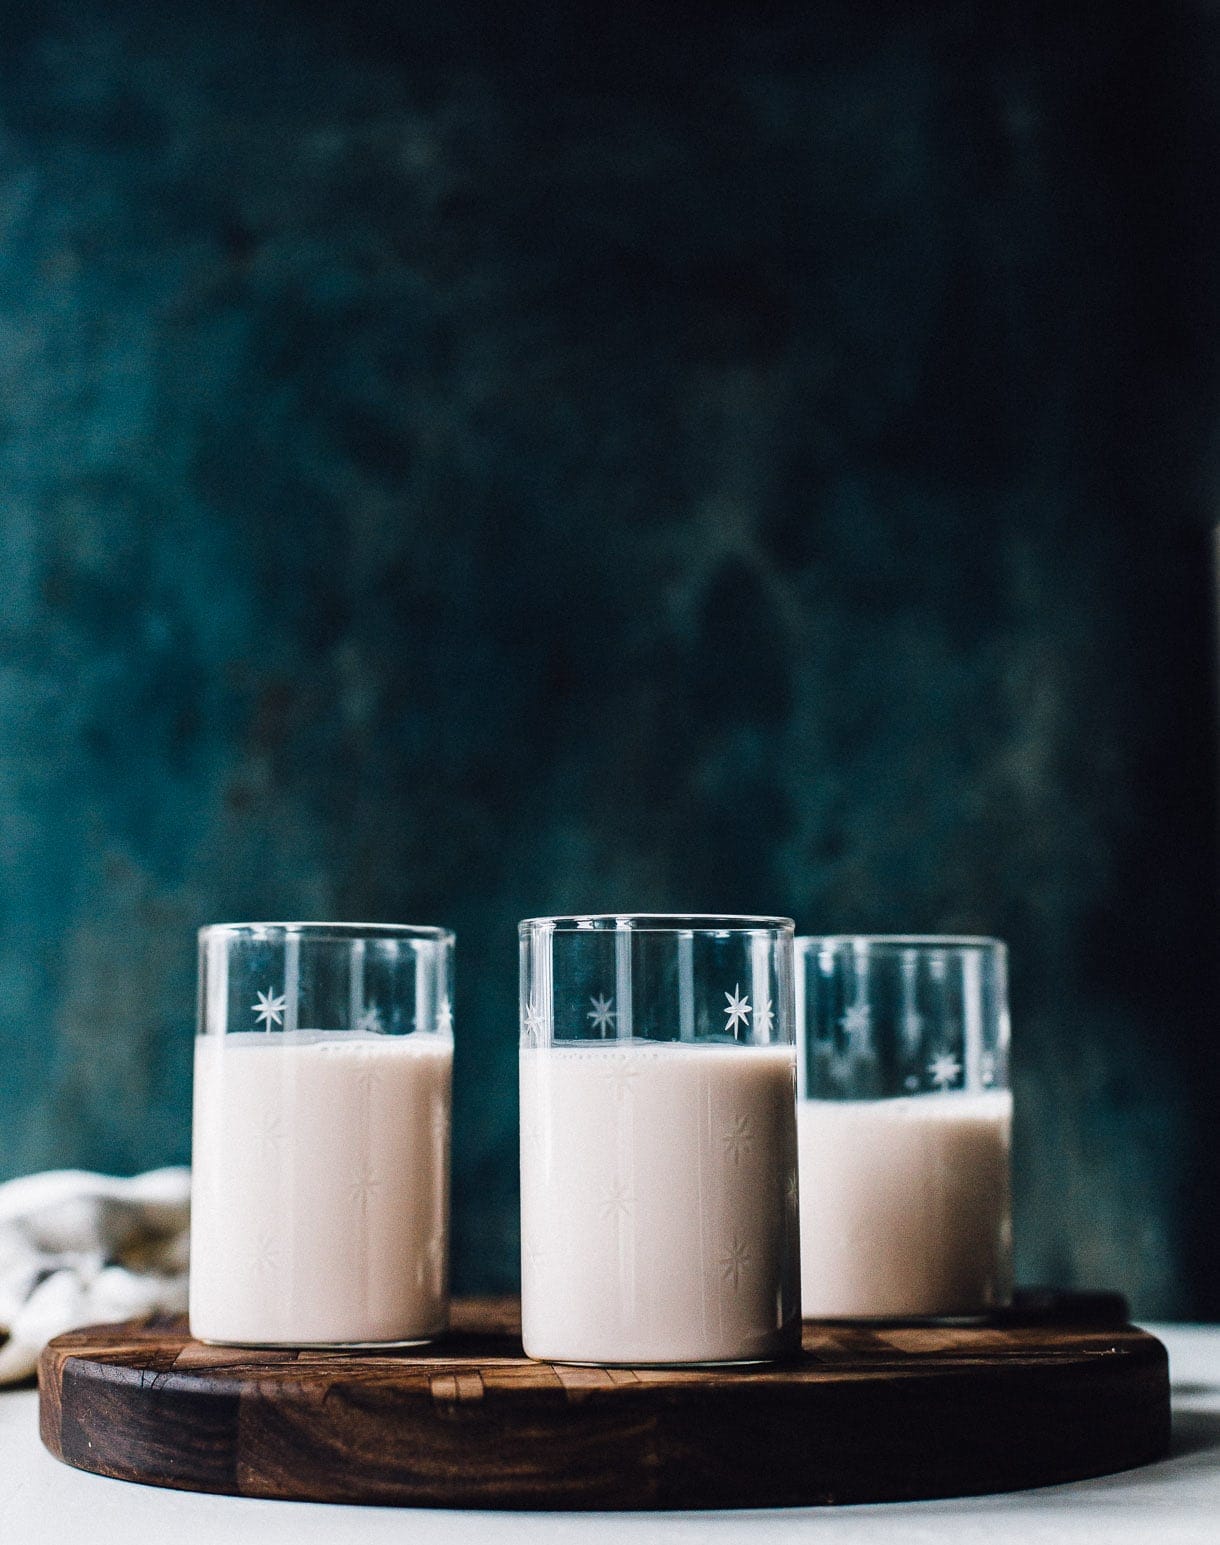 HOW TO MAKE HOMEMADE NUT MILK WITH STEP-BY-STEP PHOTOS {plus a recipe for almond pecan milk}